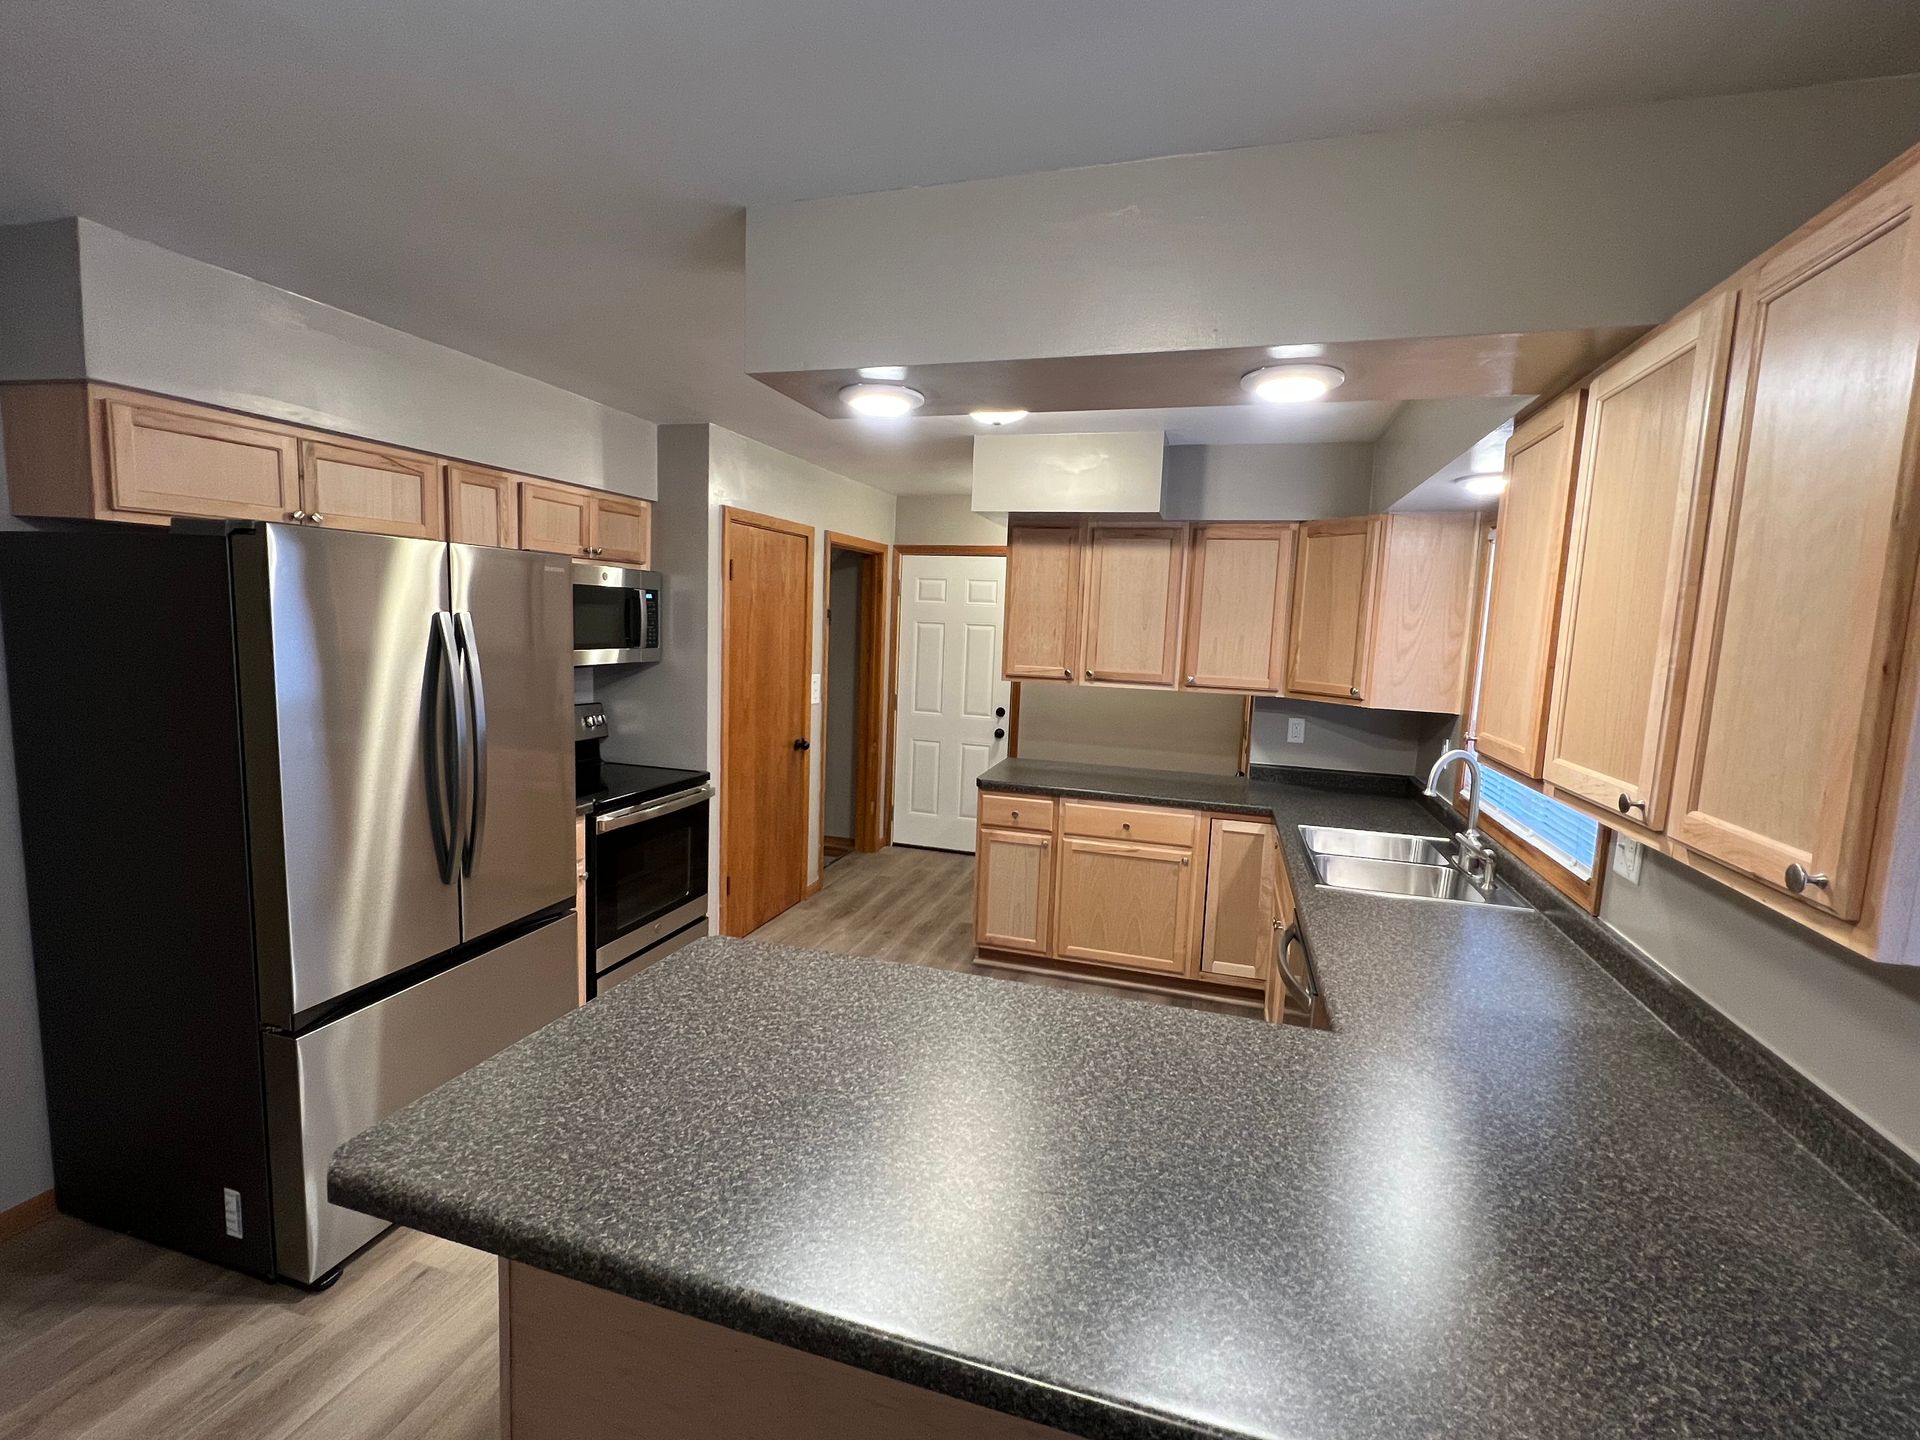 A kitchen with stainless steel appliances , granite counter tops , and wooden cabinets.